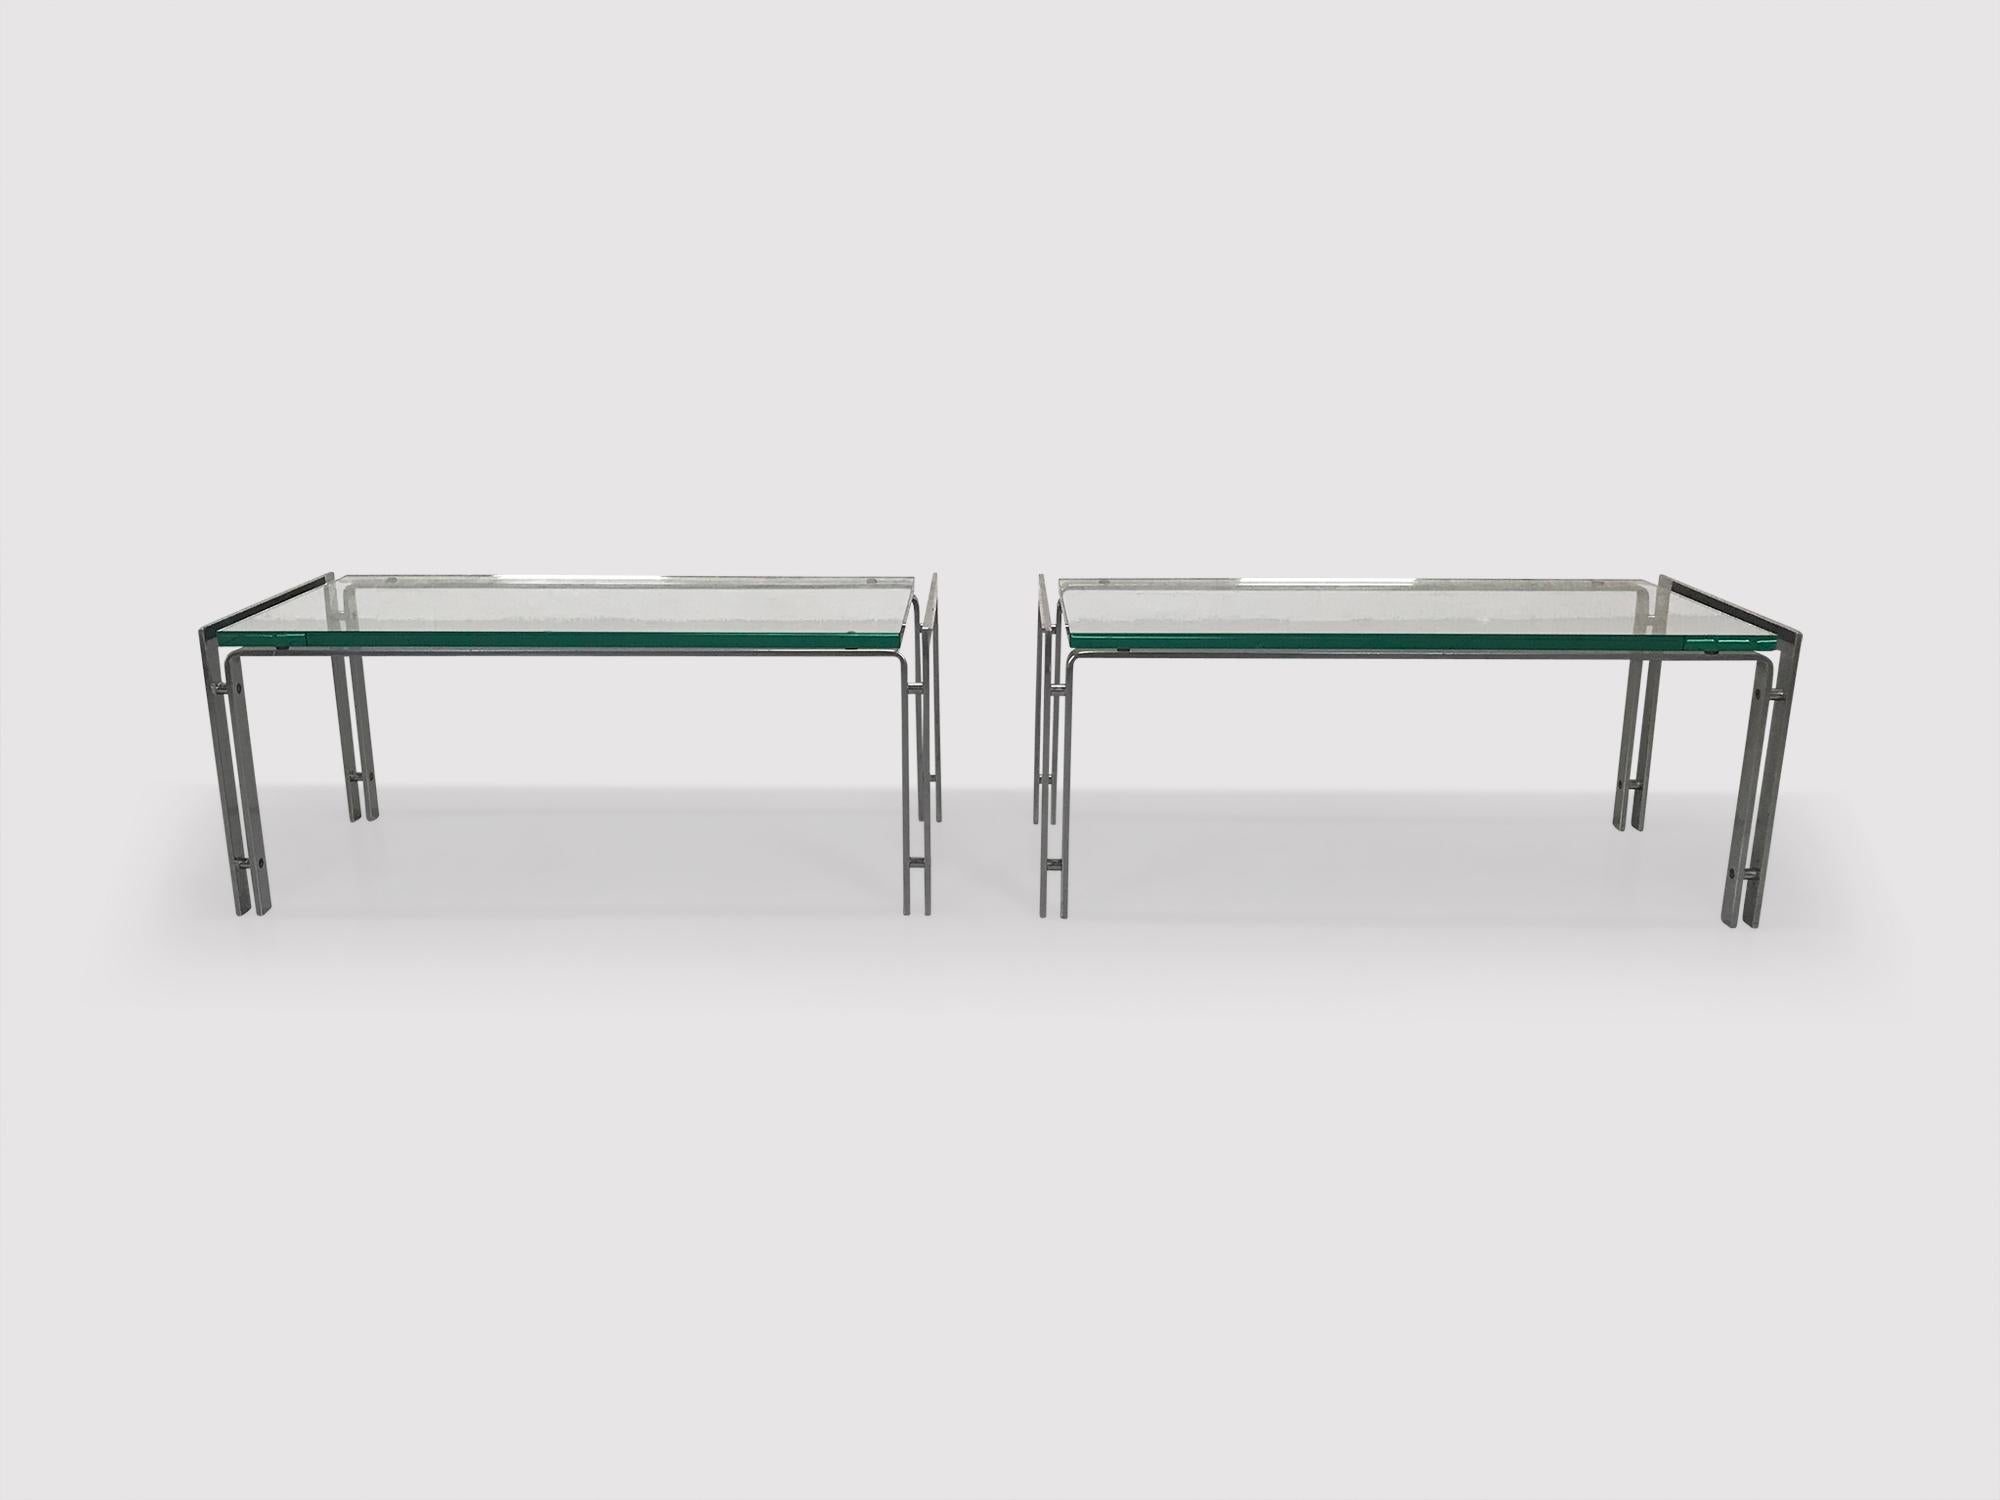 M-1 Side Table by Hank Kwint for Metaform 1980s, Set of 2 For Sale 1